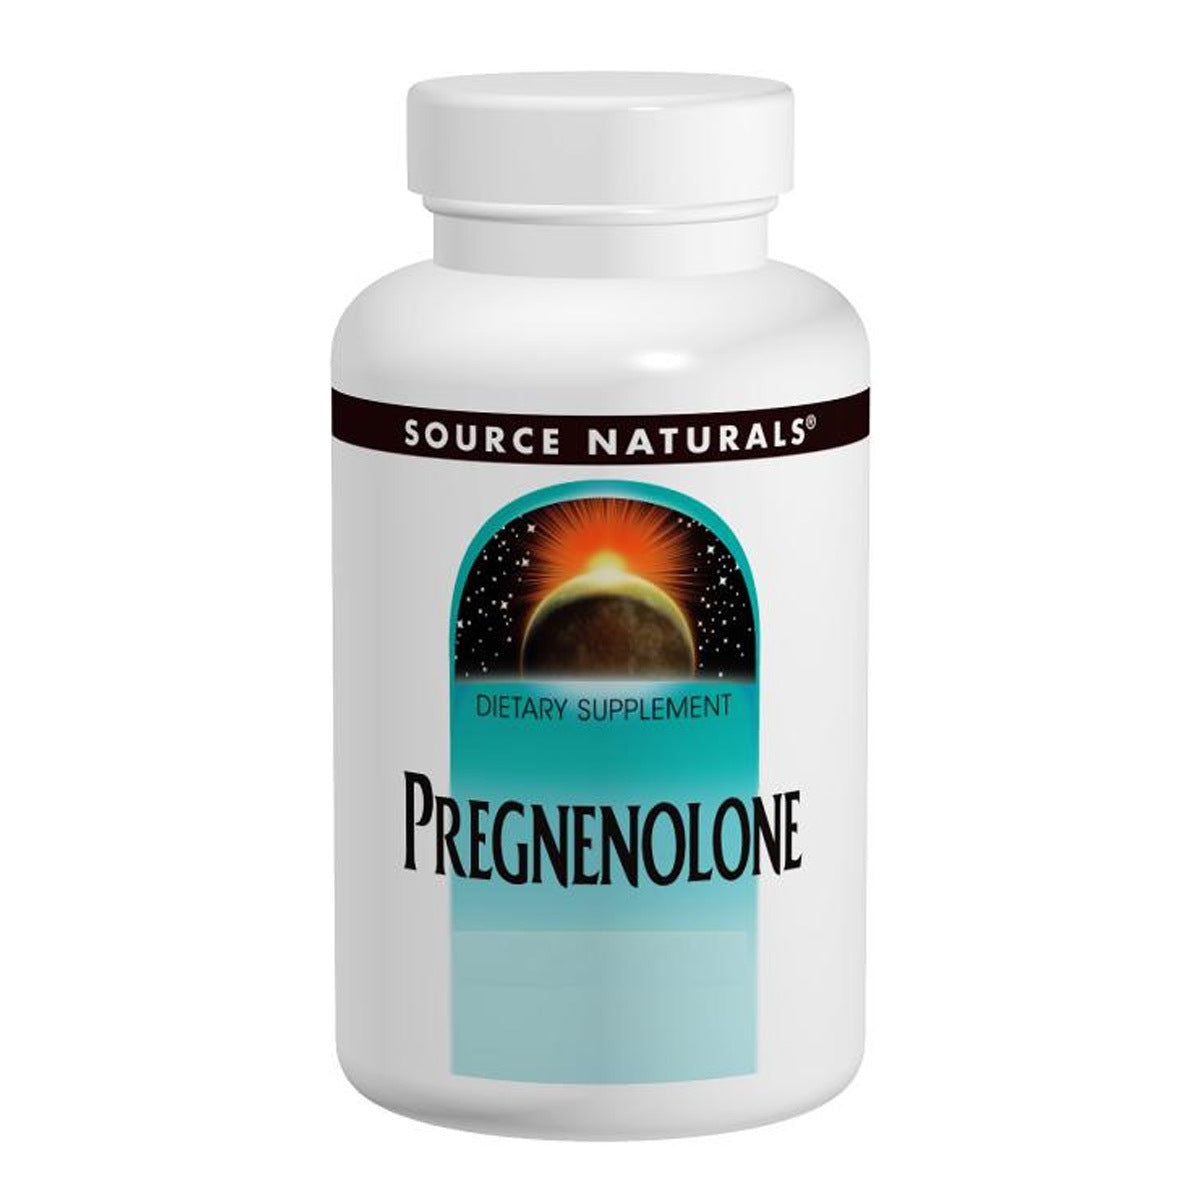 Primary image of Pregnenolone 25mg